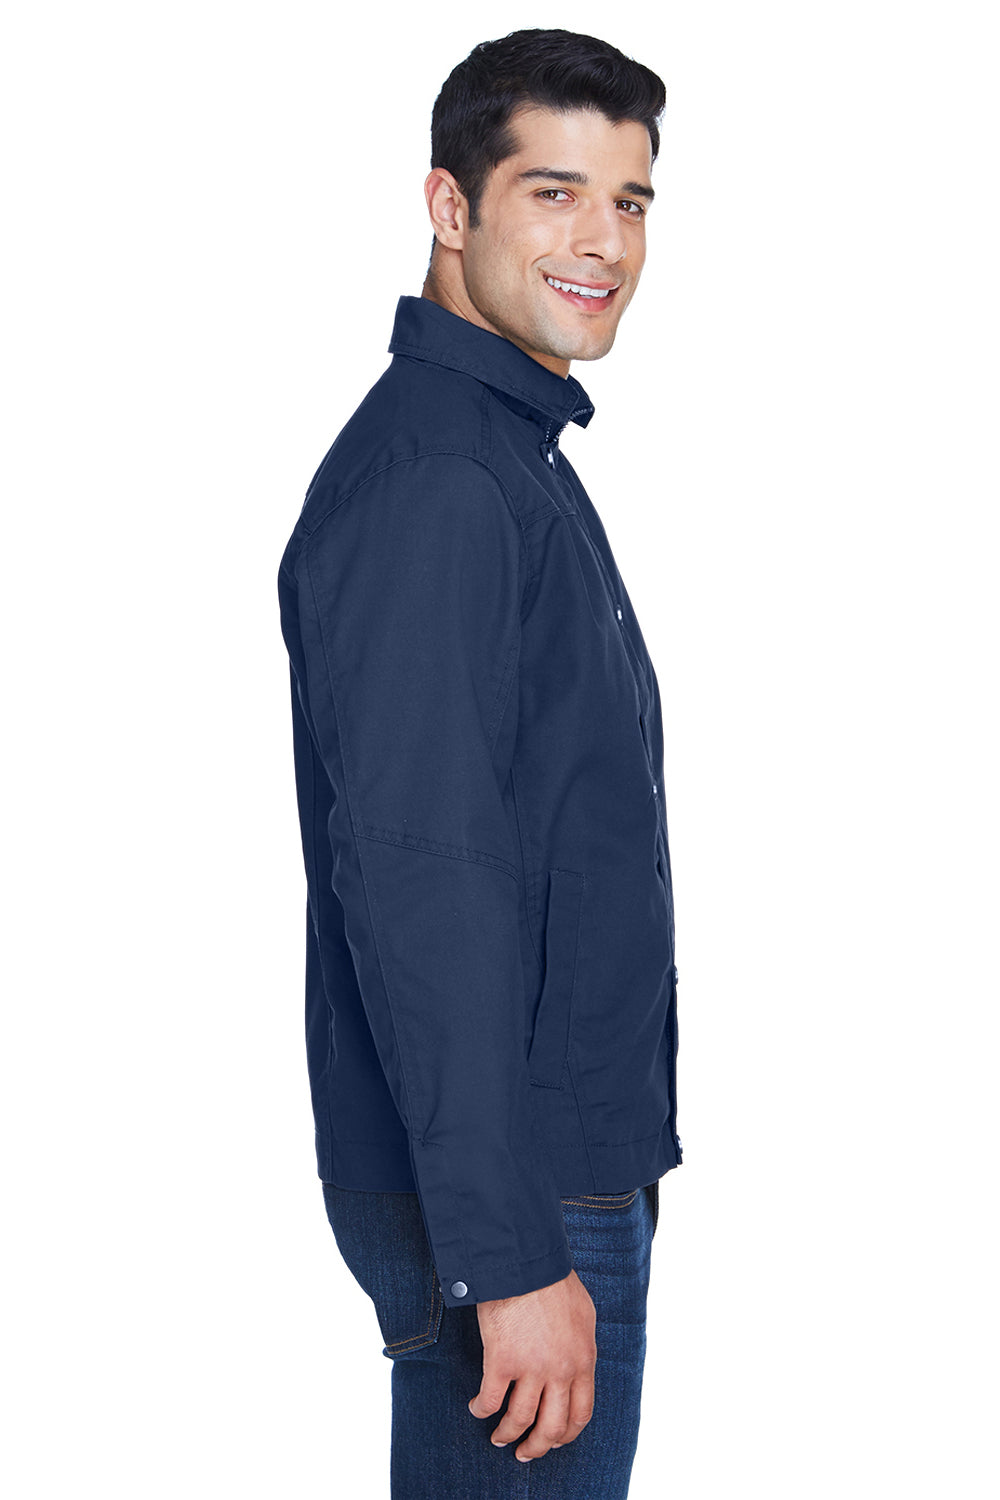 Harriton M705 Mens Auxiliary Water Resistant Canvas Full Zip Jacket Navy Blue Side